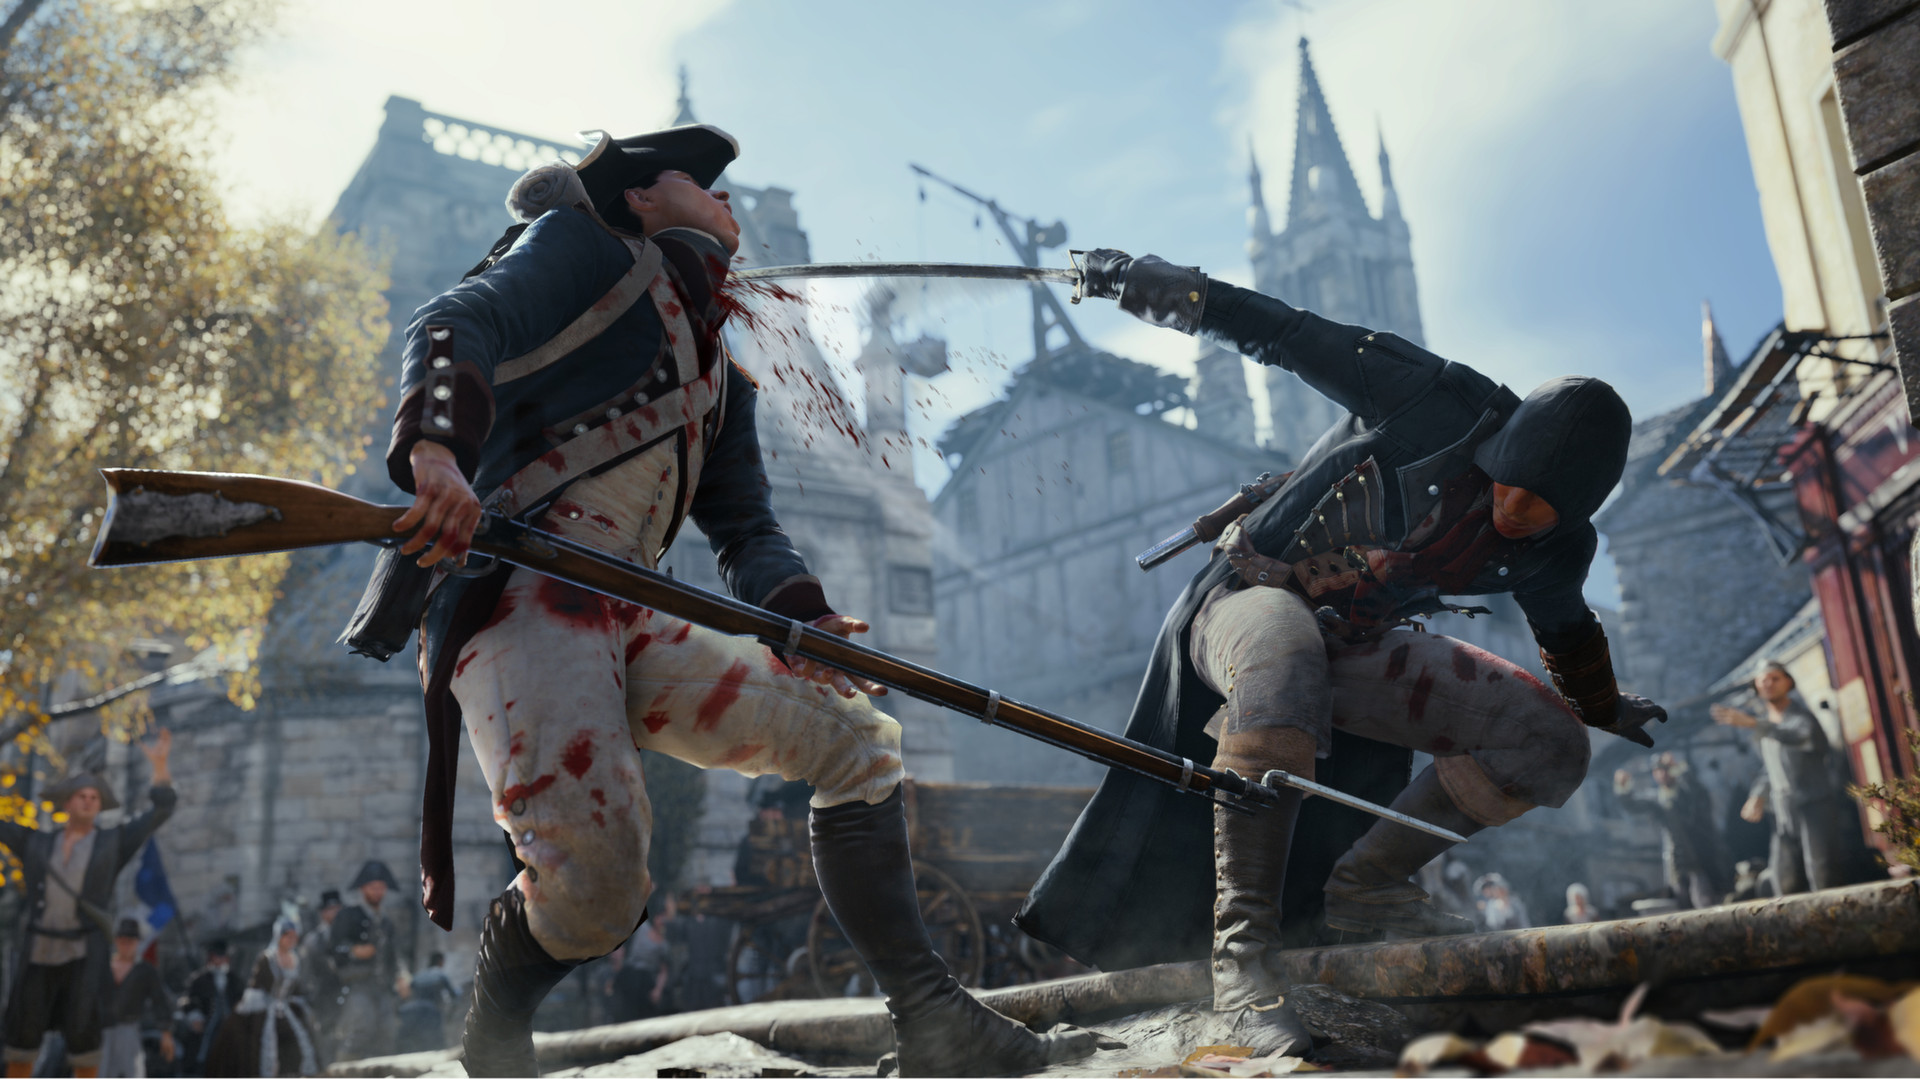 [Fshare] [PC] Assassin's Creed Unity [Action|2014]